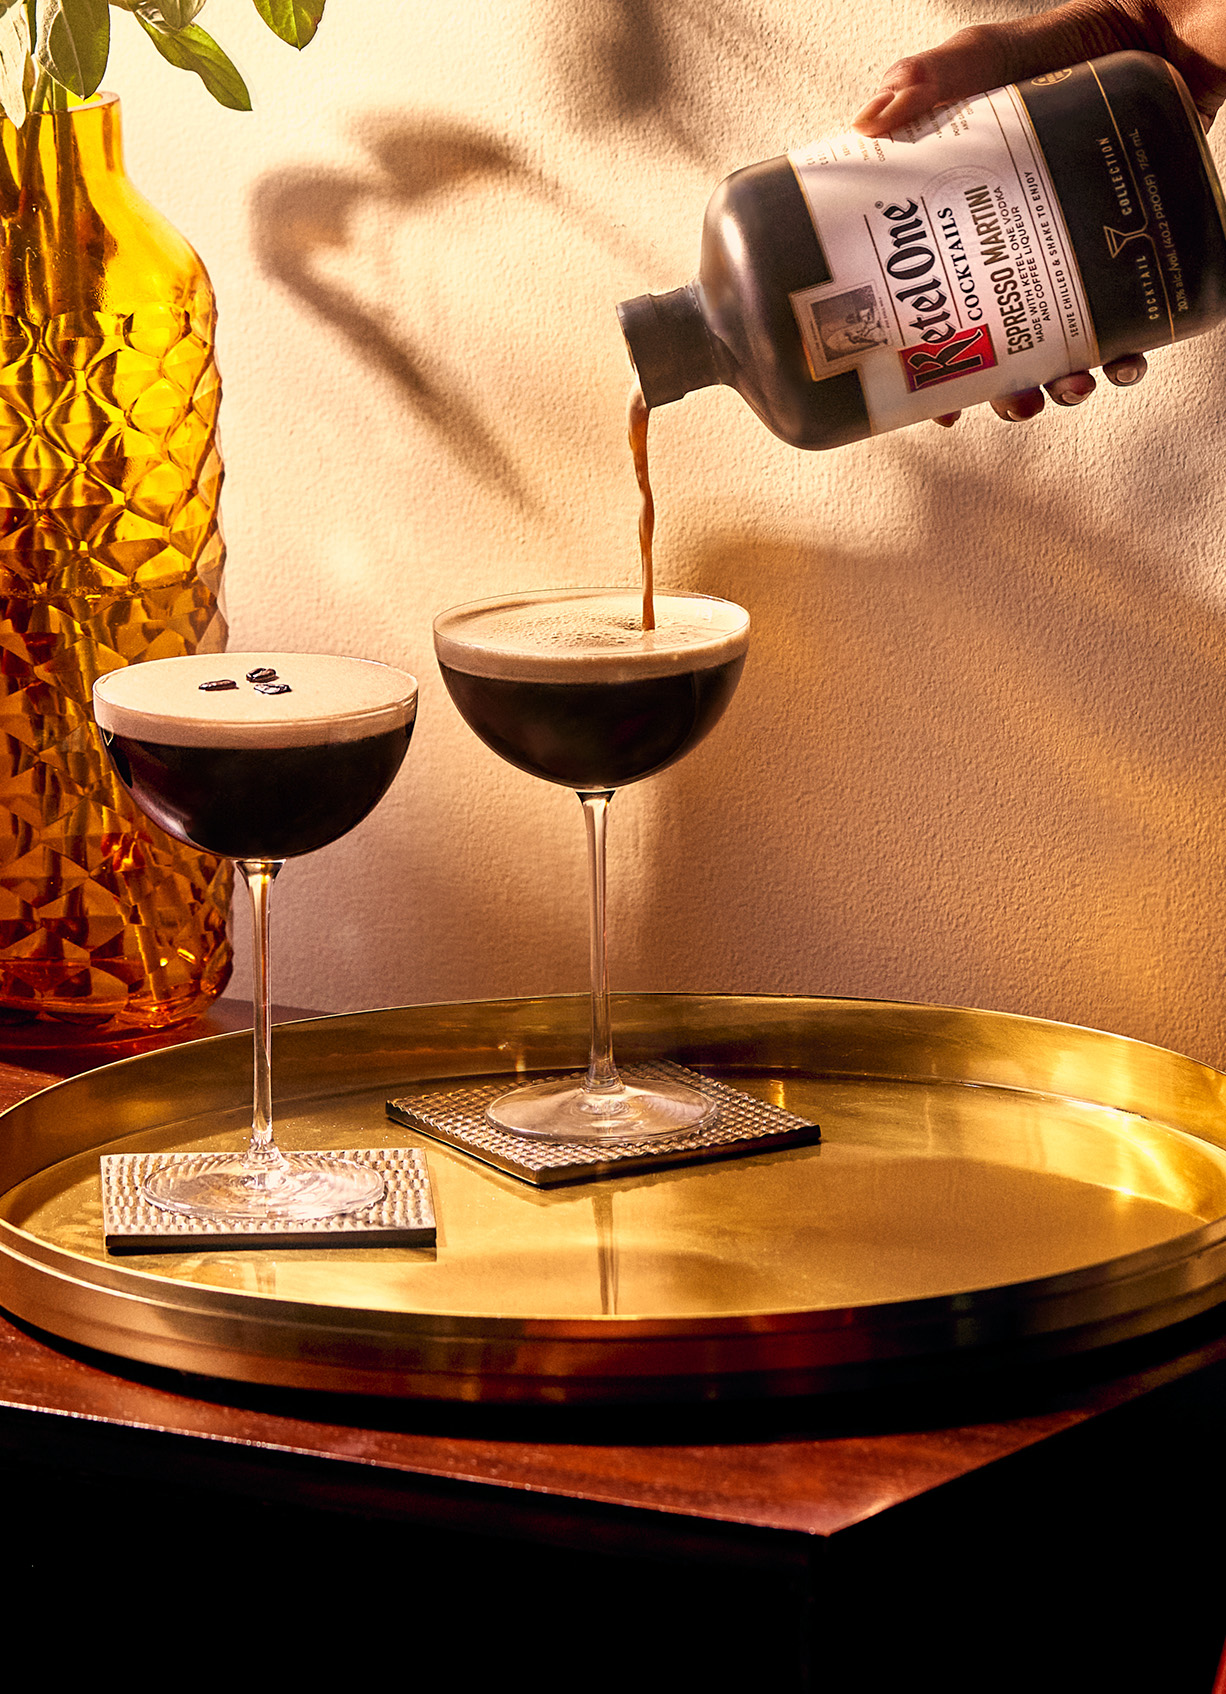 Ketel One Vodka Espresso Martini from The Cocktail Collection